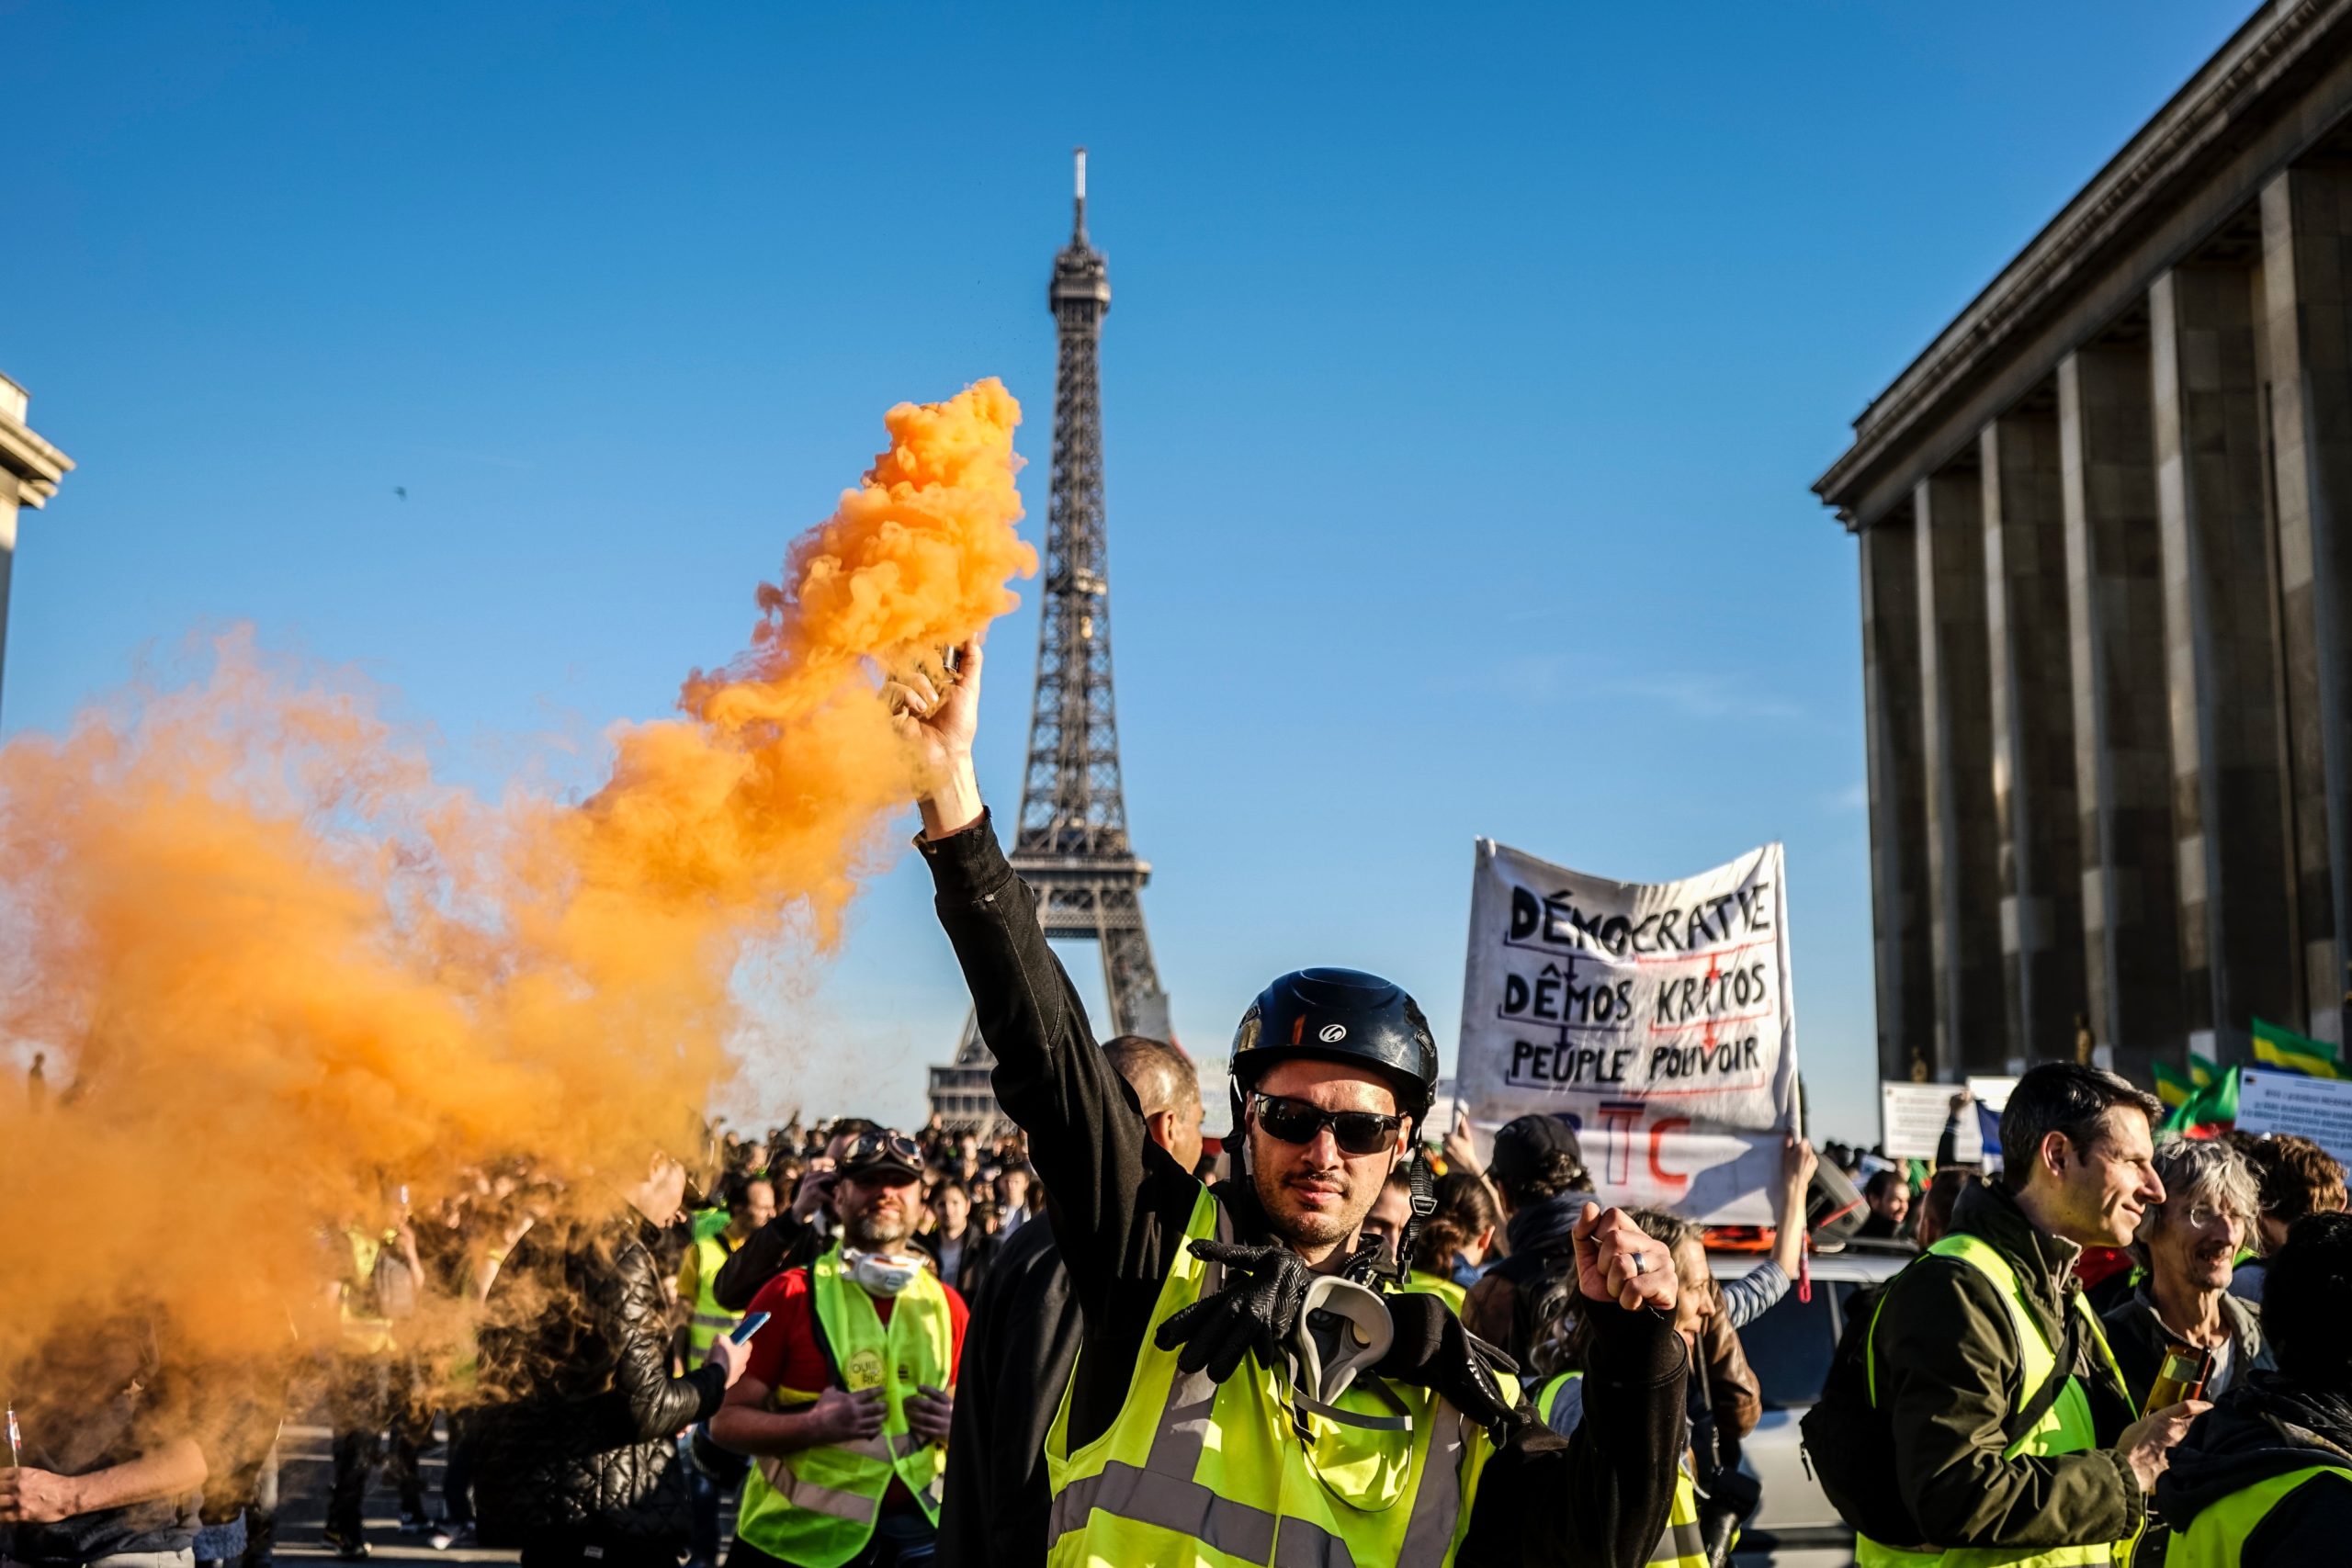 protest_yellow_vest_france_paris2 Vision of Humanity